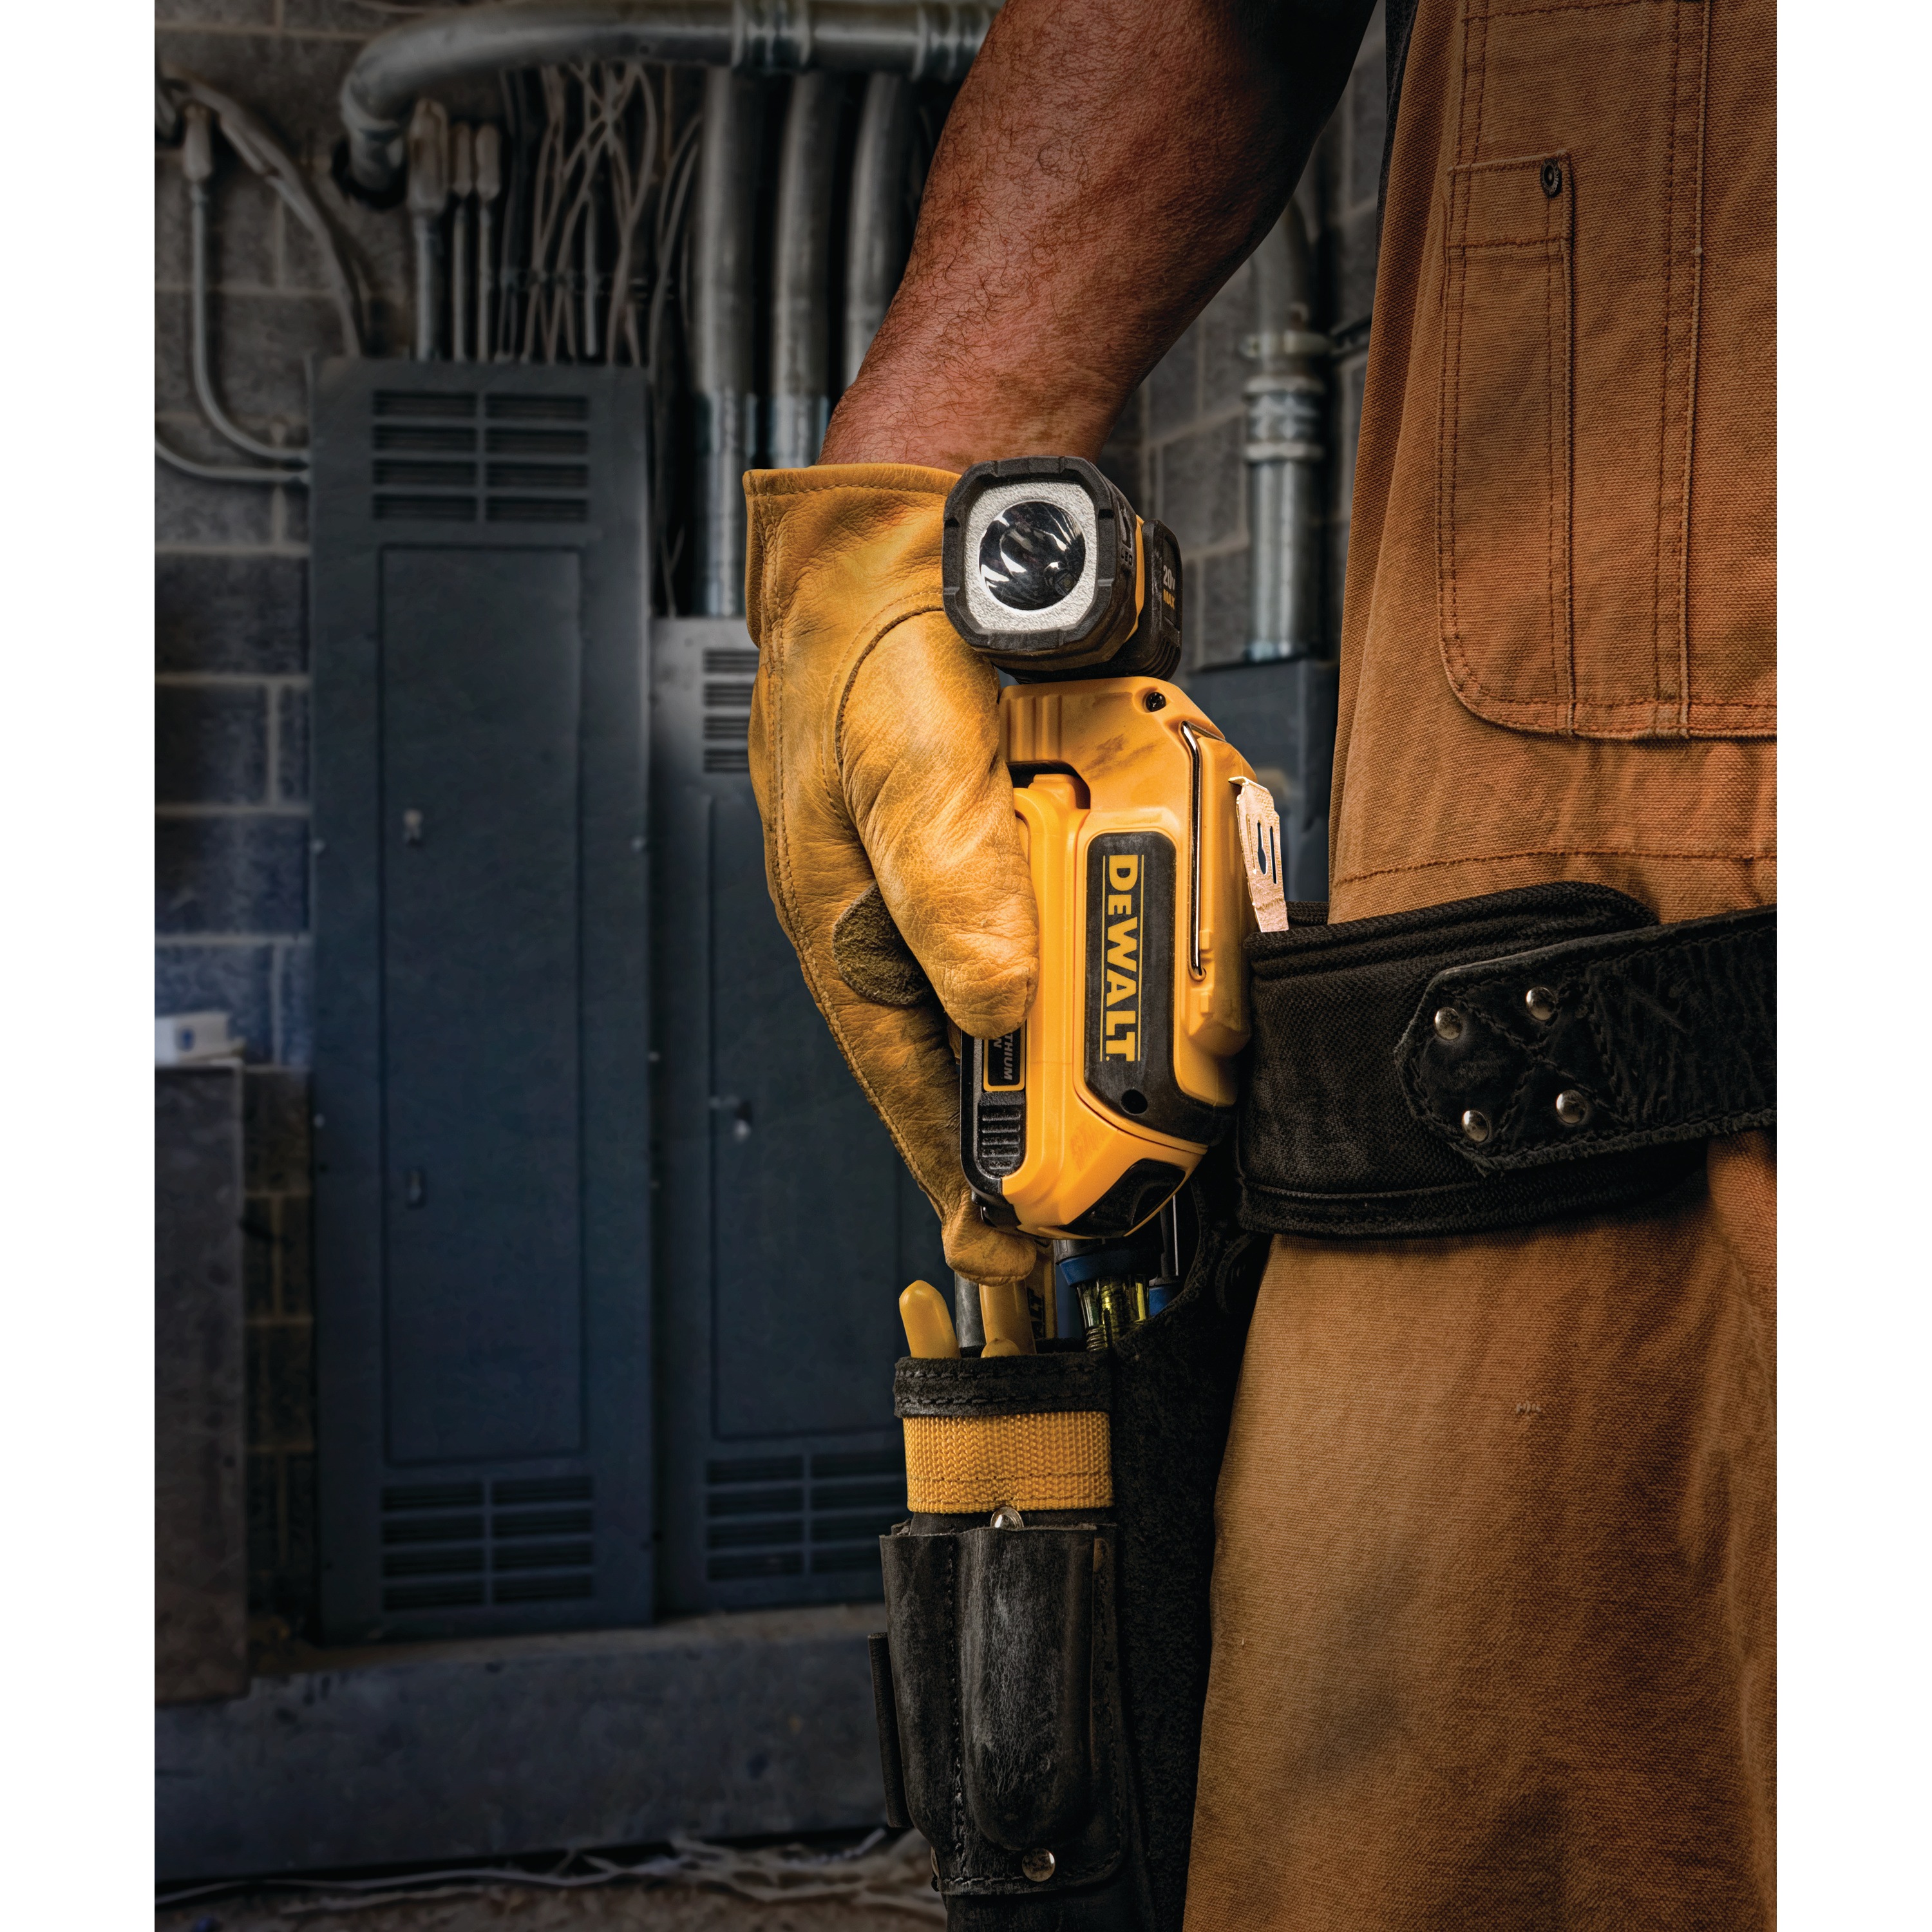 LED handheld work light being shown in a person's tool pouch